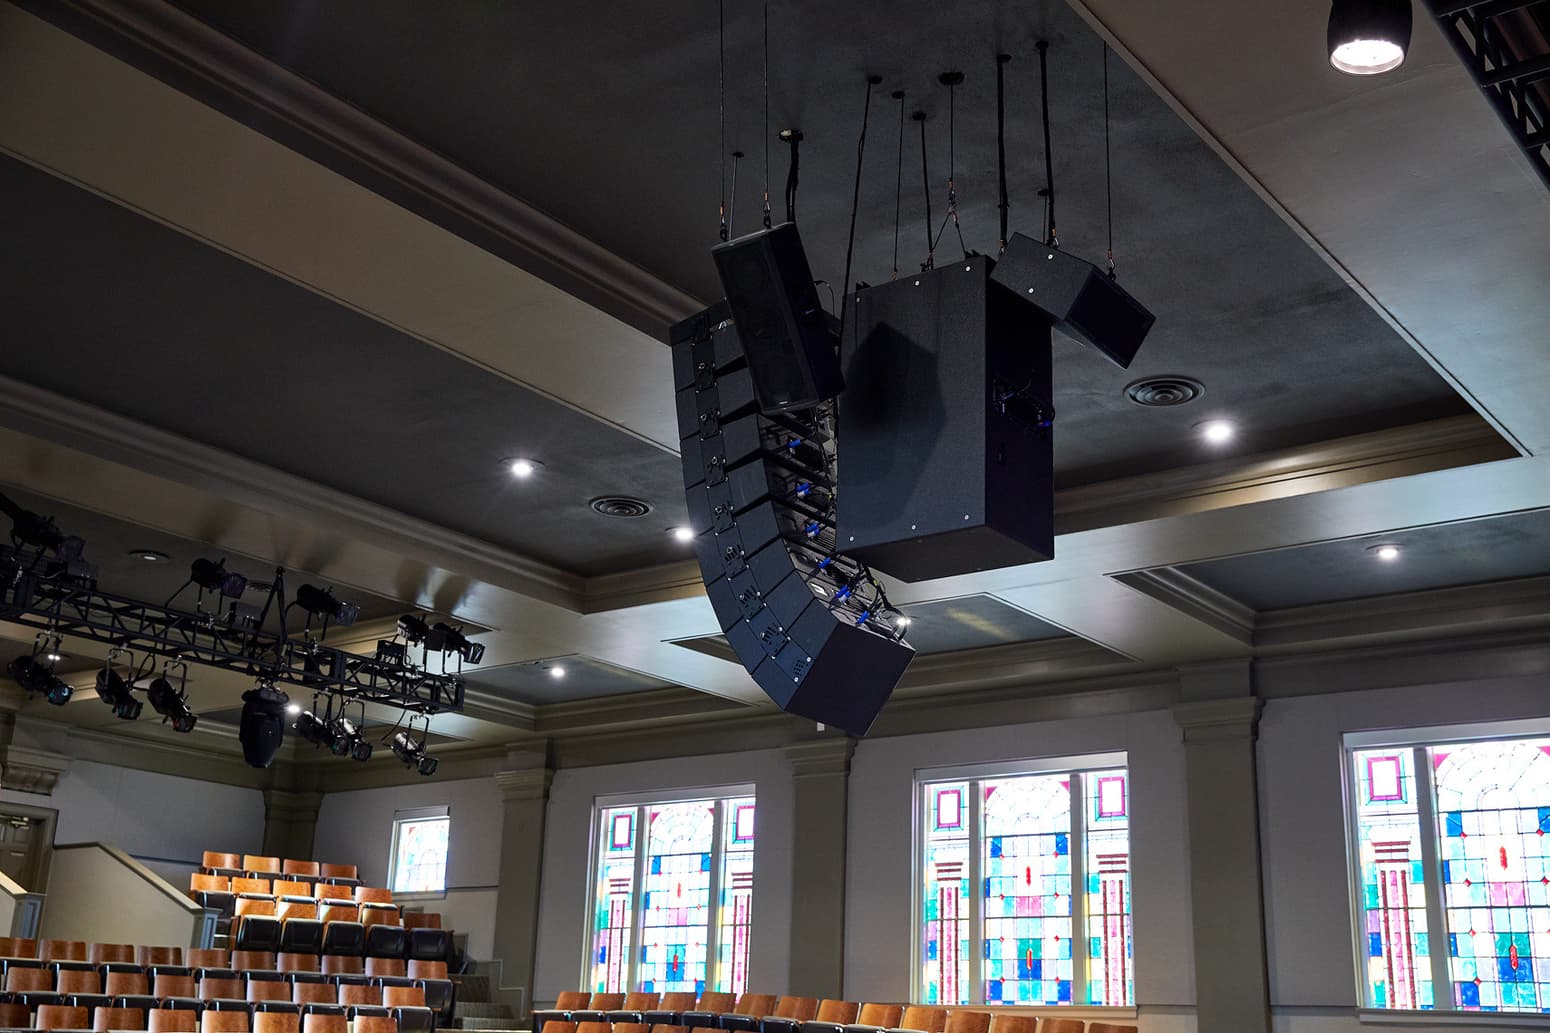 Audio designs and sound design company Paragon 360 created this ceiling sound system.